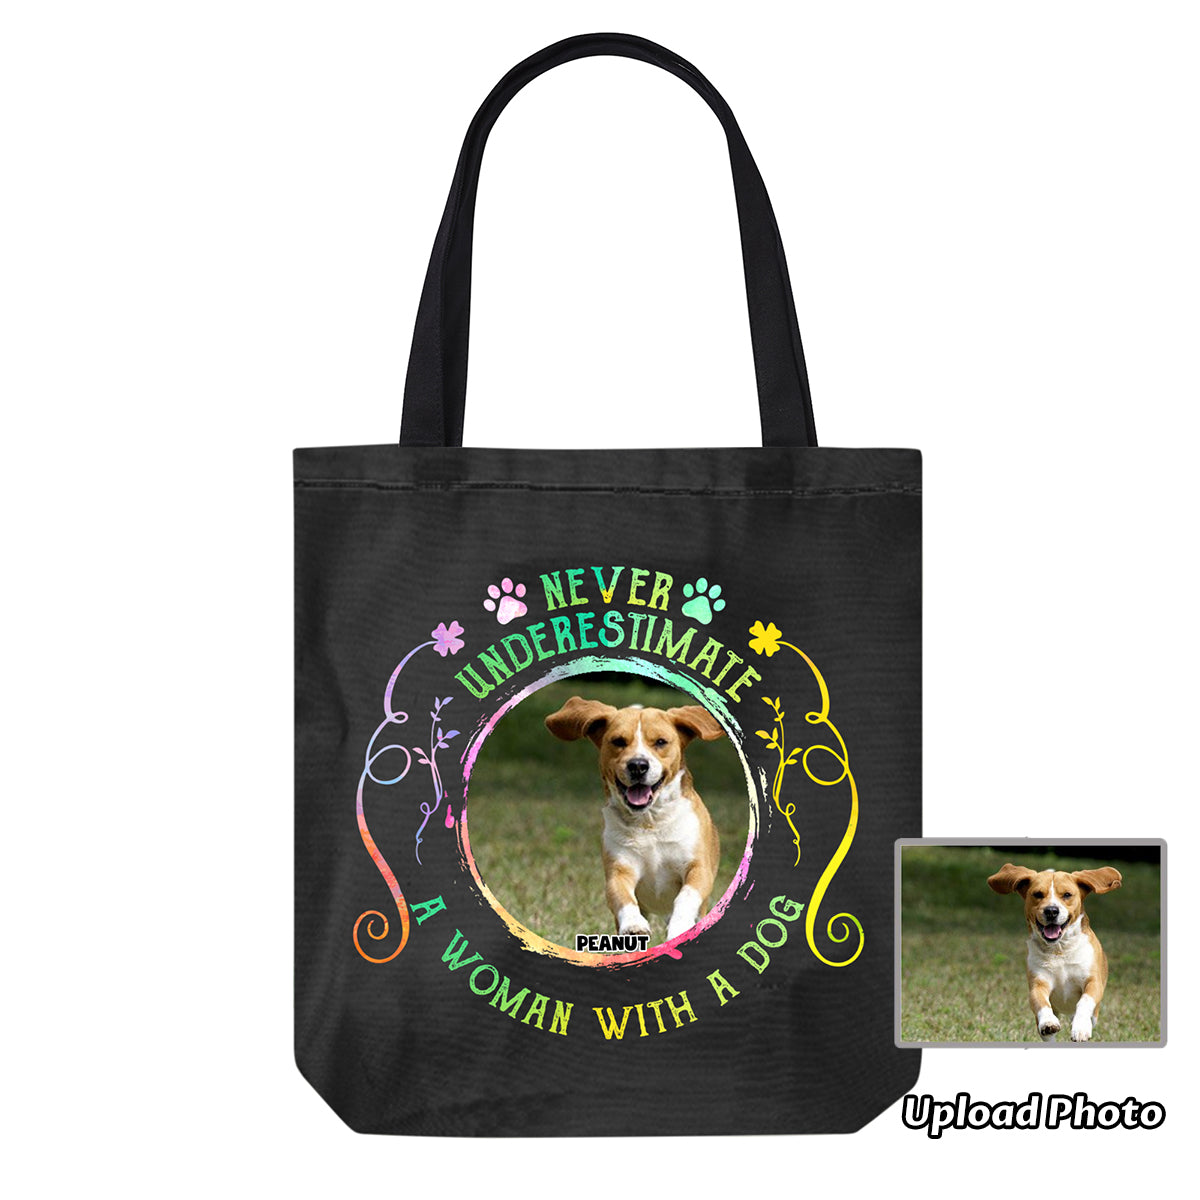 A Woman With A Dog Personalized Canvas Bag